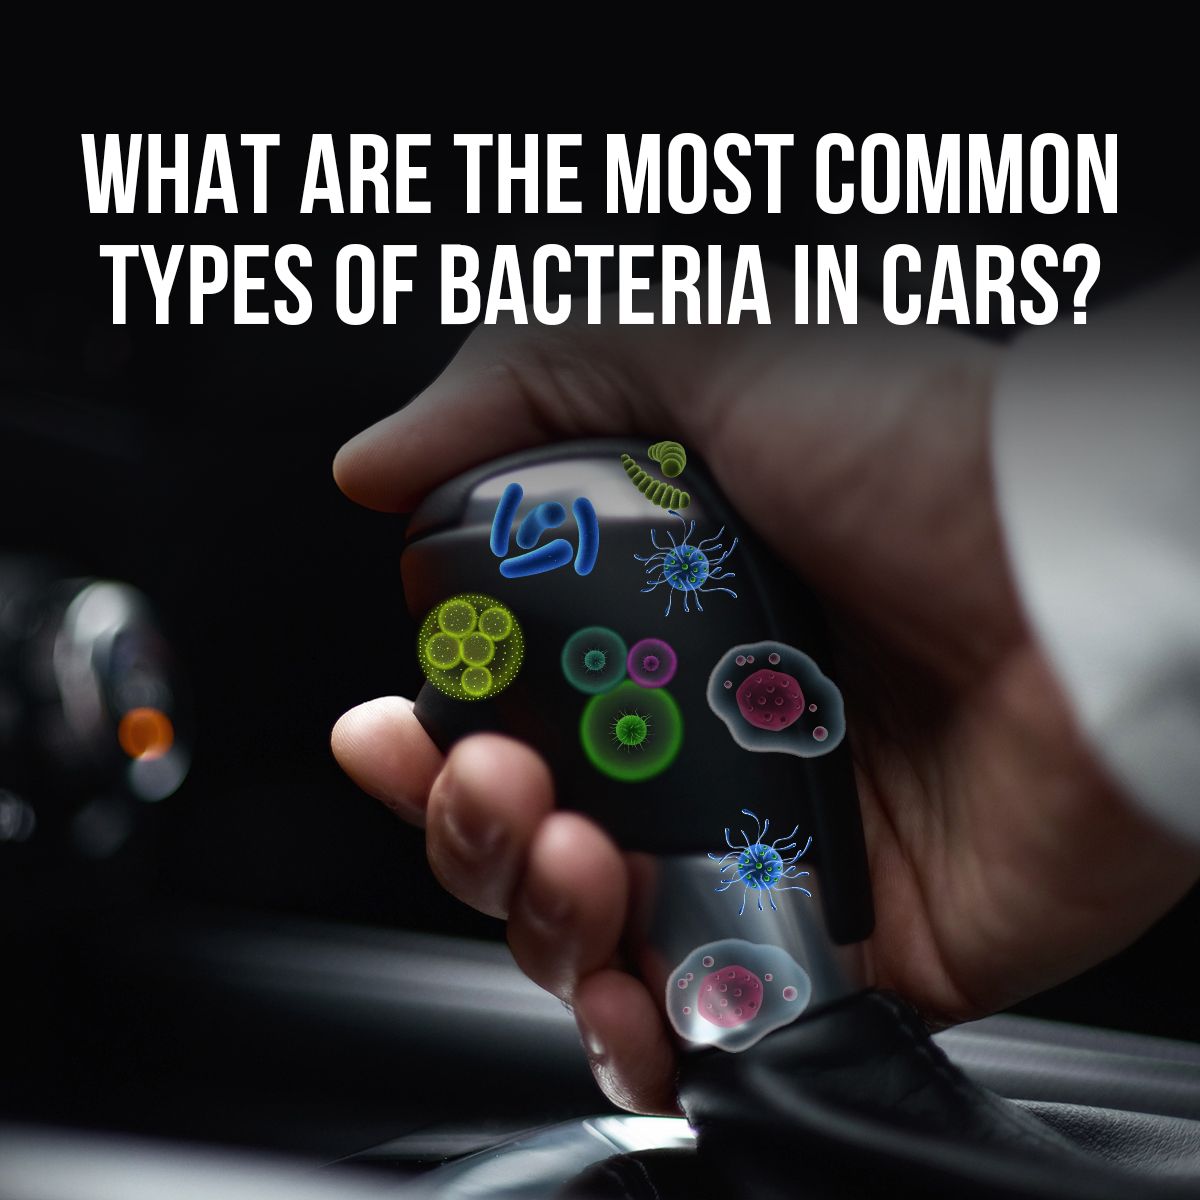 What Are the Most Common Types of Bacteria in Cars?